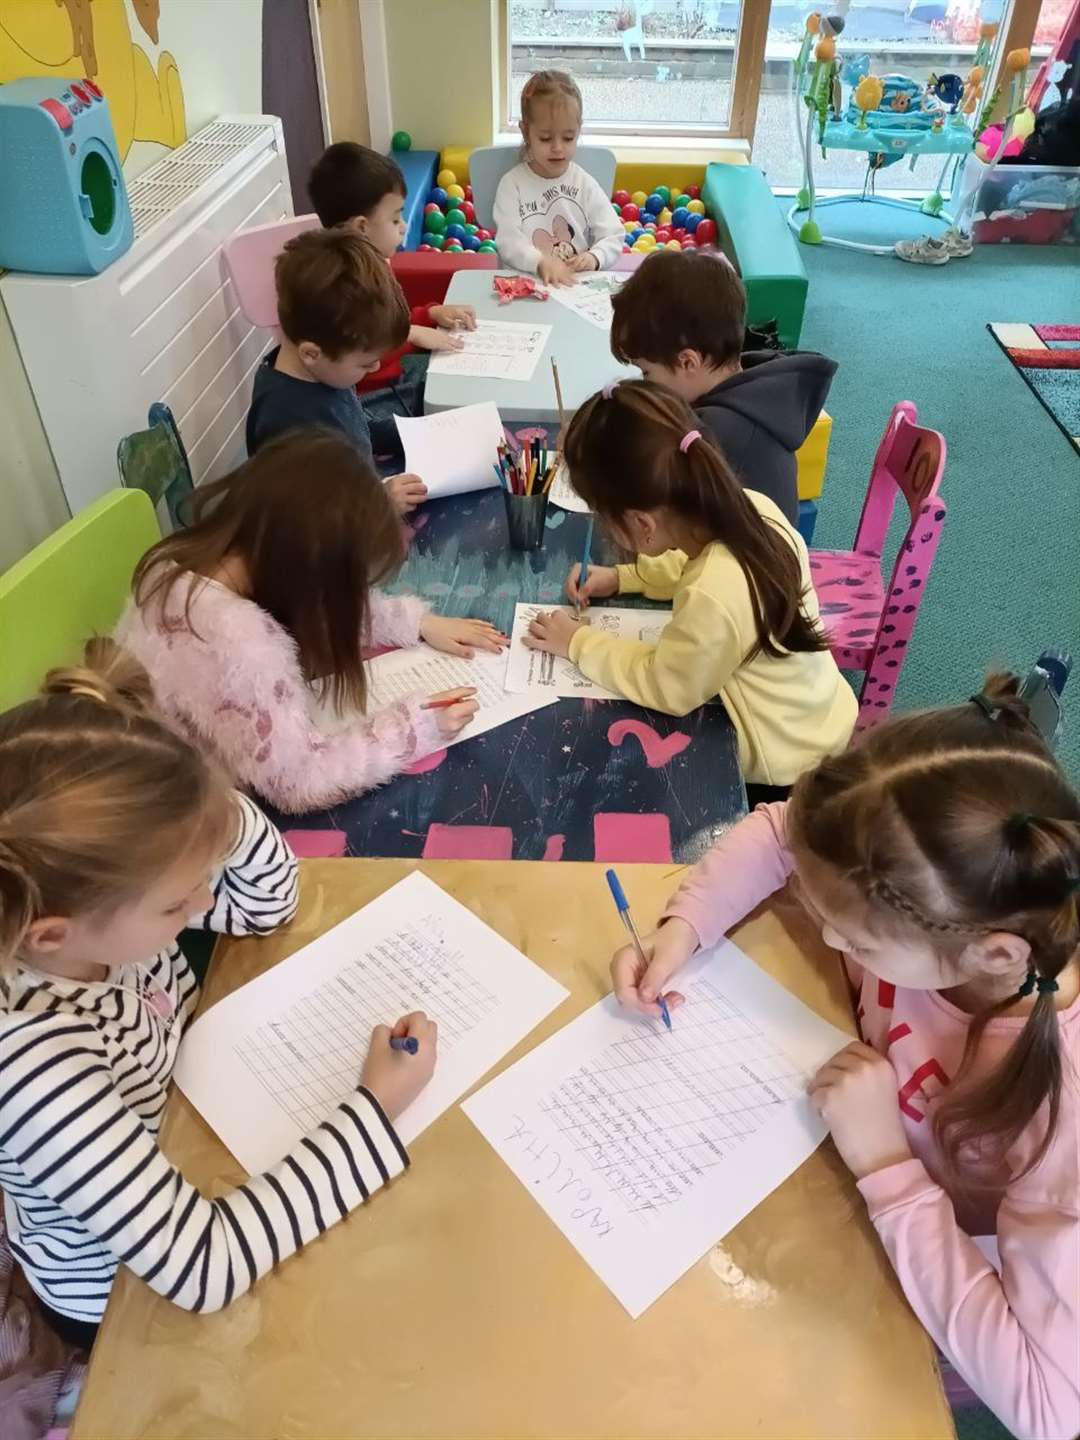 Classes at The Ukrainian School Surrey include Ukrainian language lesson and the history of Ukraine (The Ukrainian School Surrey)